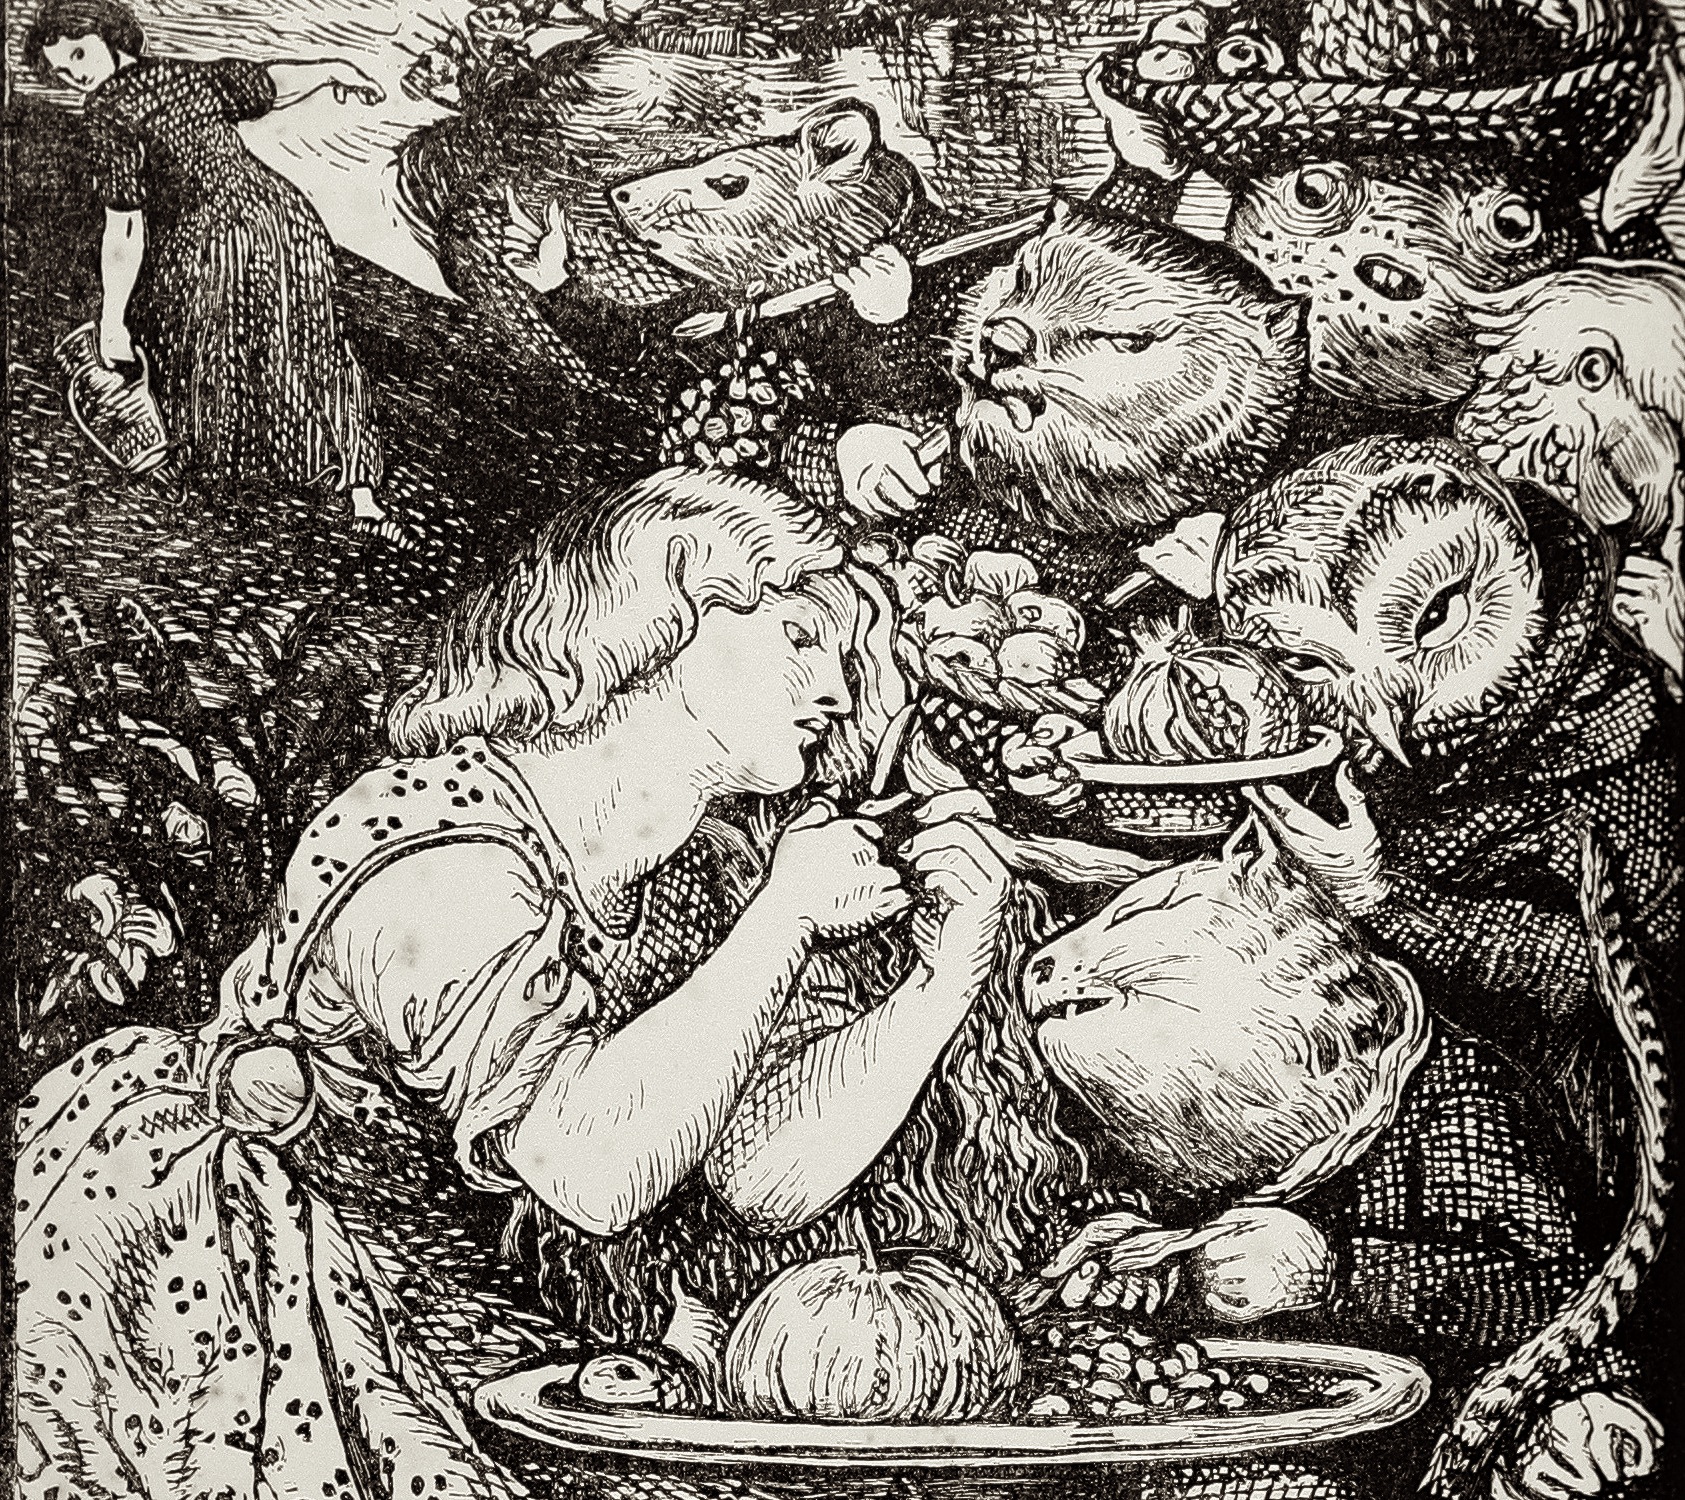 an illustration of Laura paying the goblins with a golden curl, made by Dante Gabriel Rossetti for Christina Rossetti's Goblin Market